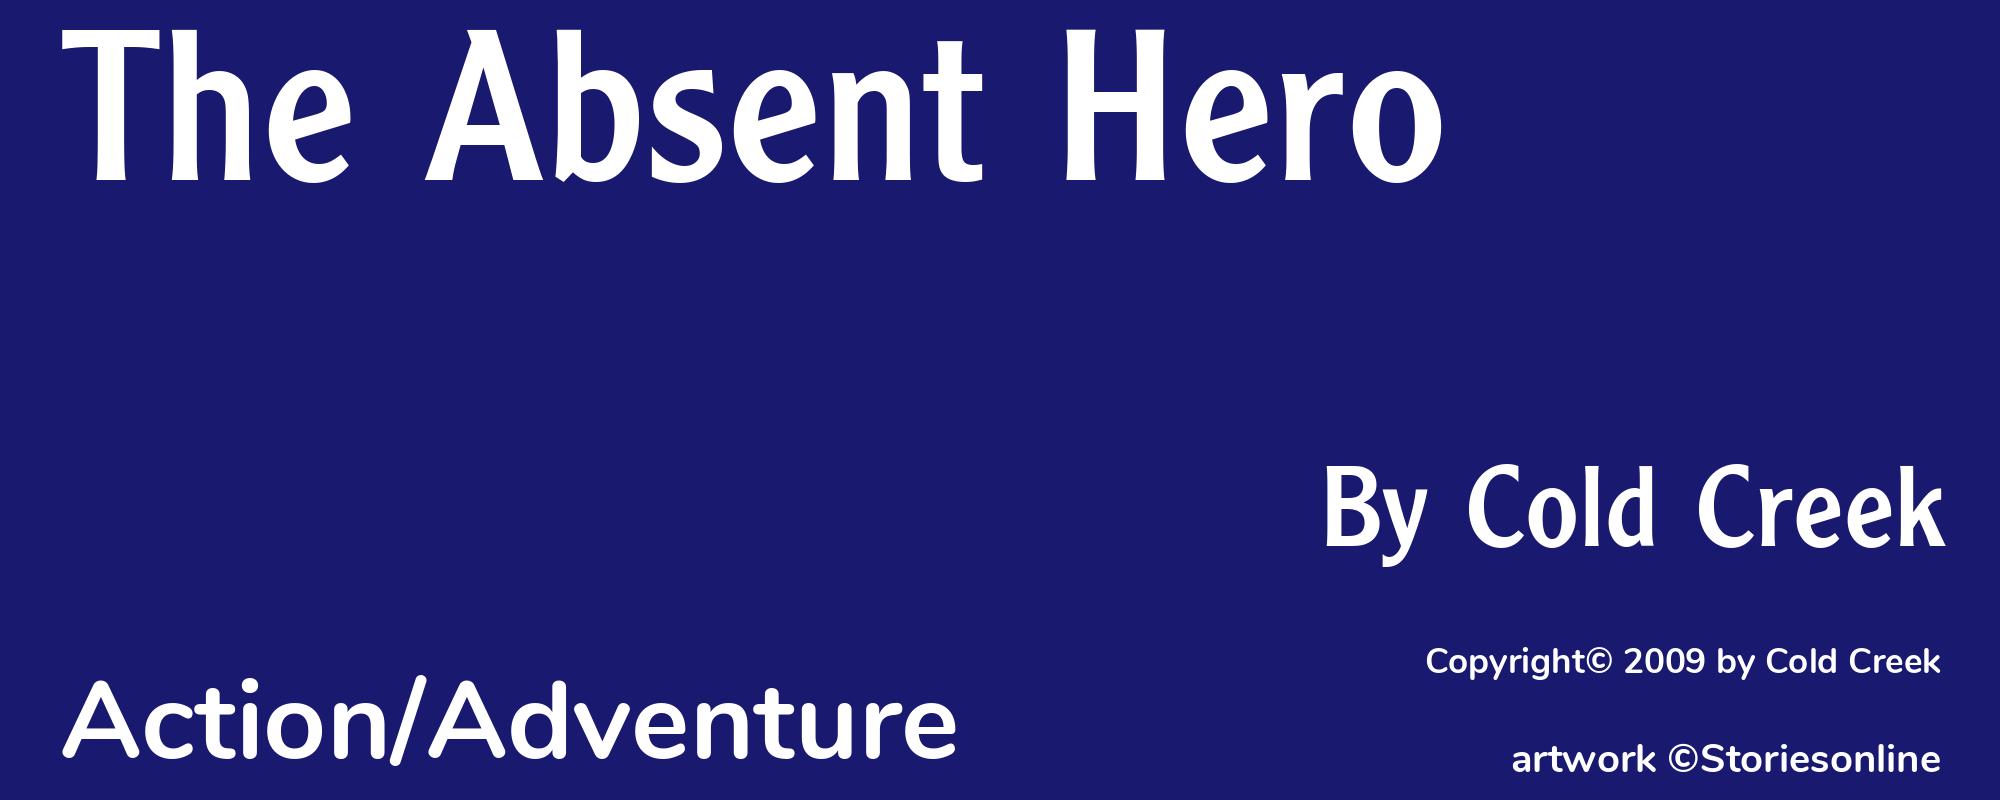 The Absent Hero - Cover